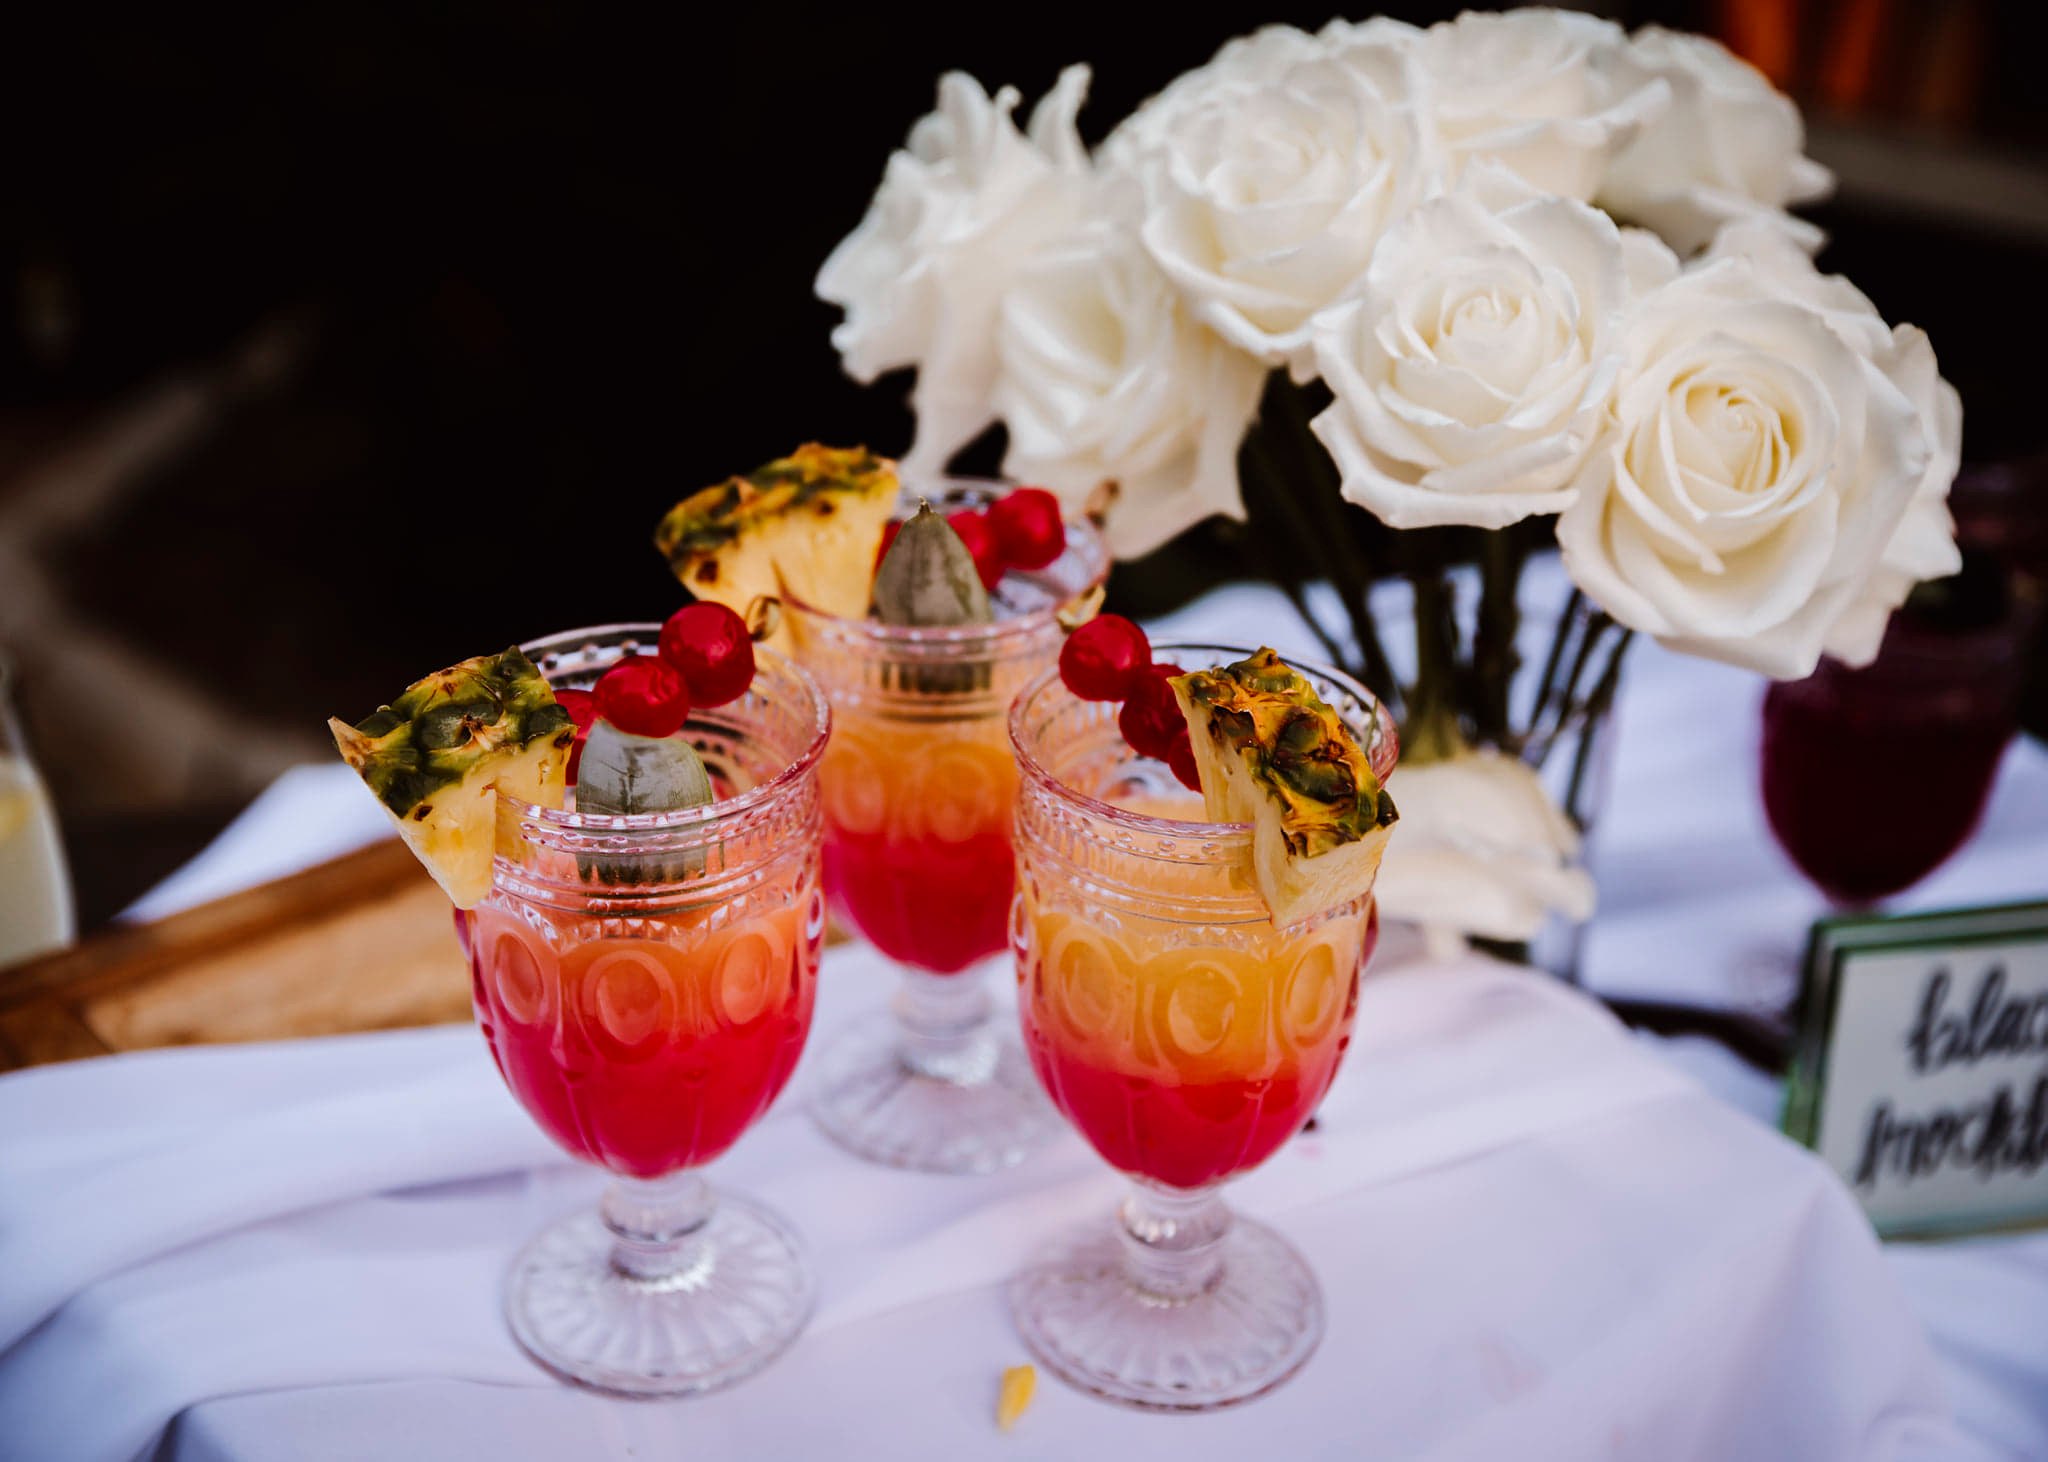 three fruit drink cocktails next to a white rose centerpiece